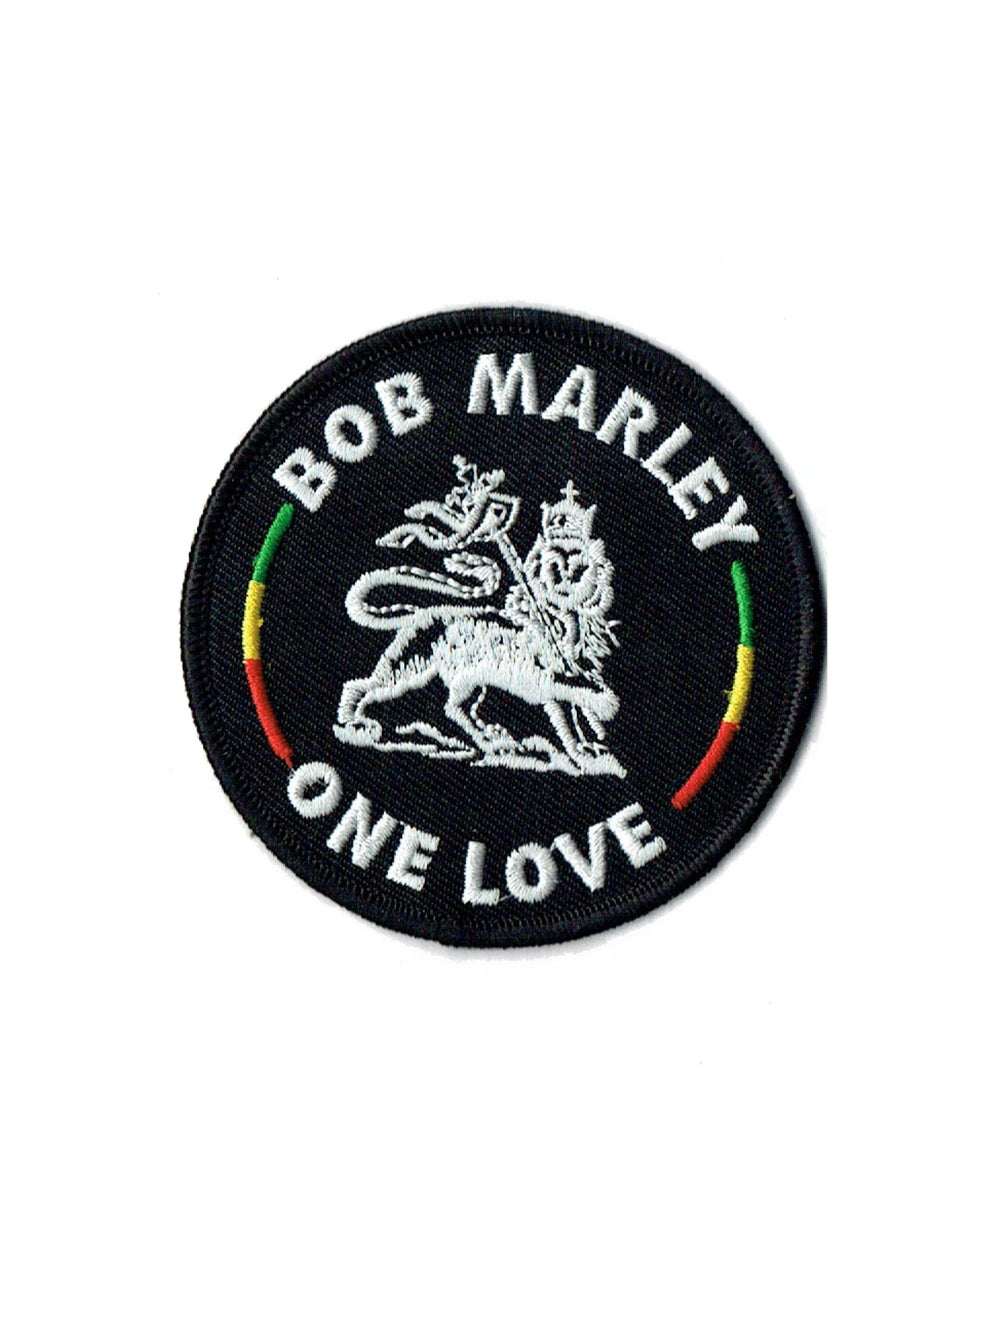 Bob Marley One Love Lion Zion Official Woven Patch Brand New